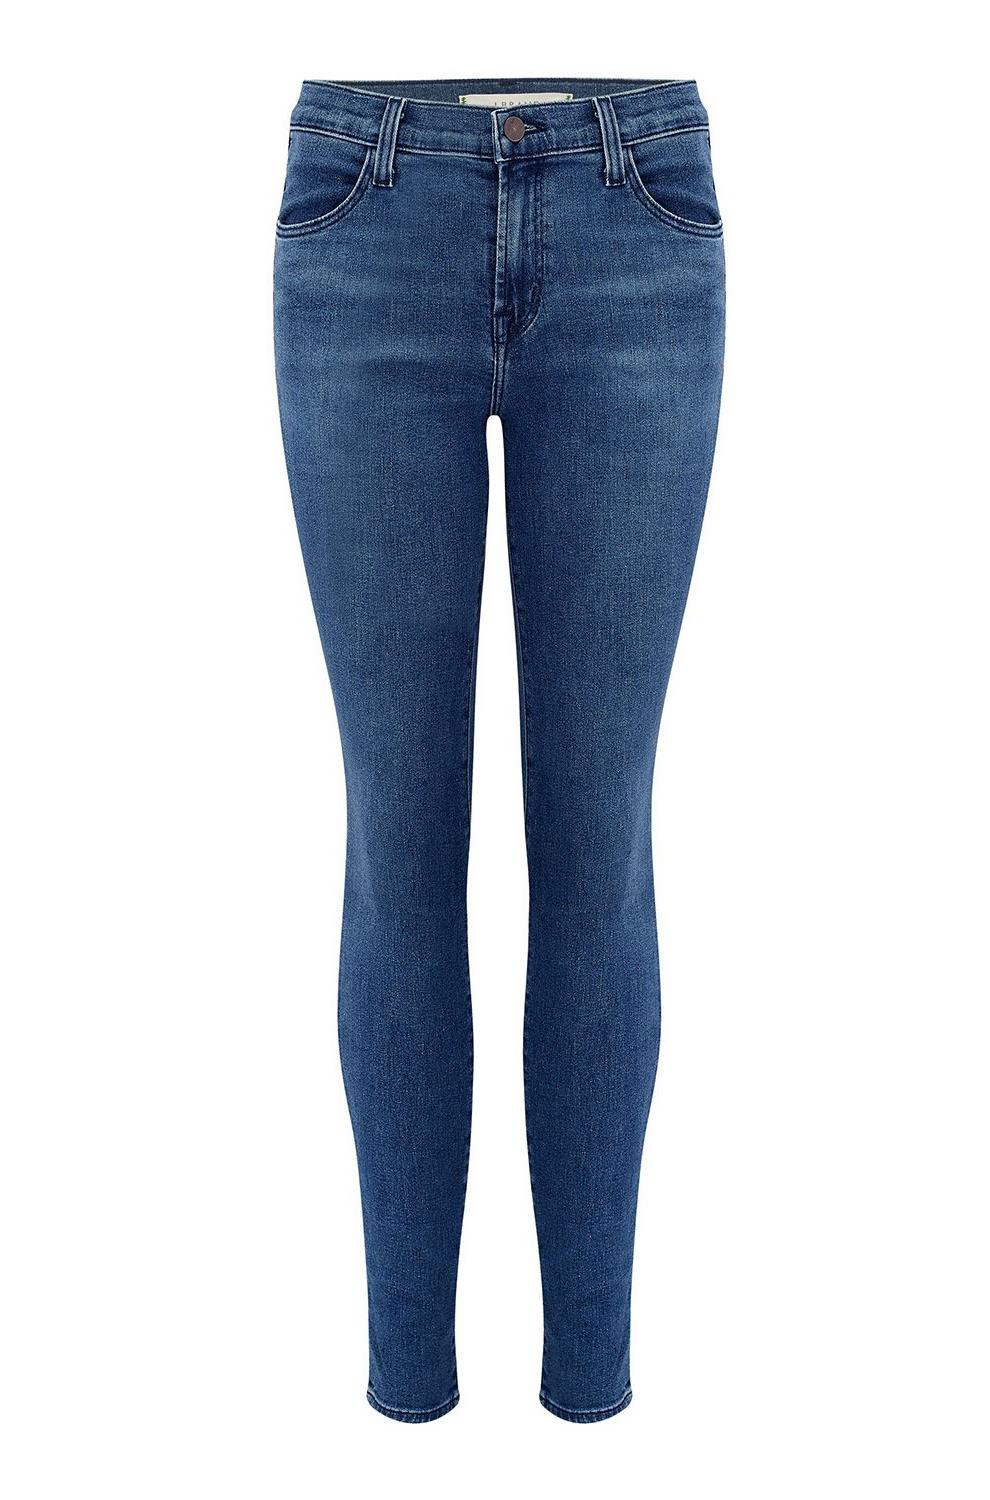 J Brand Jeans Maria High Rise Skinny in Earthy Sustainable Denim